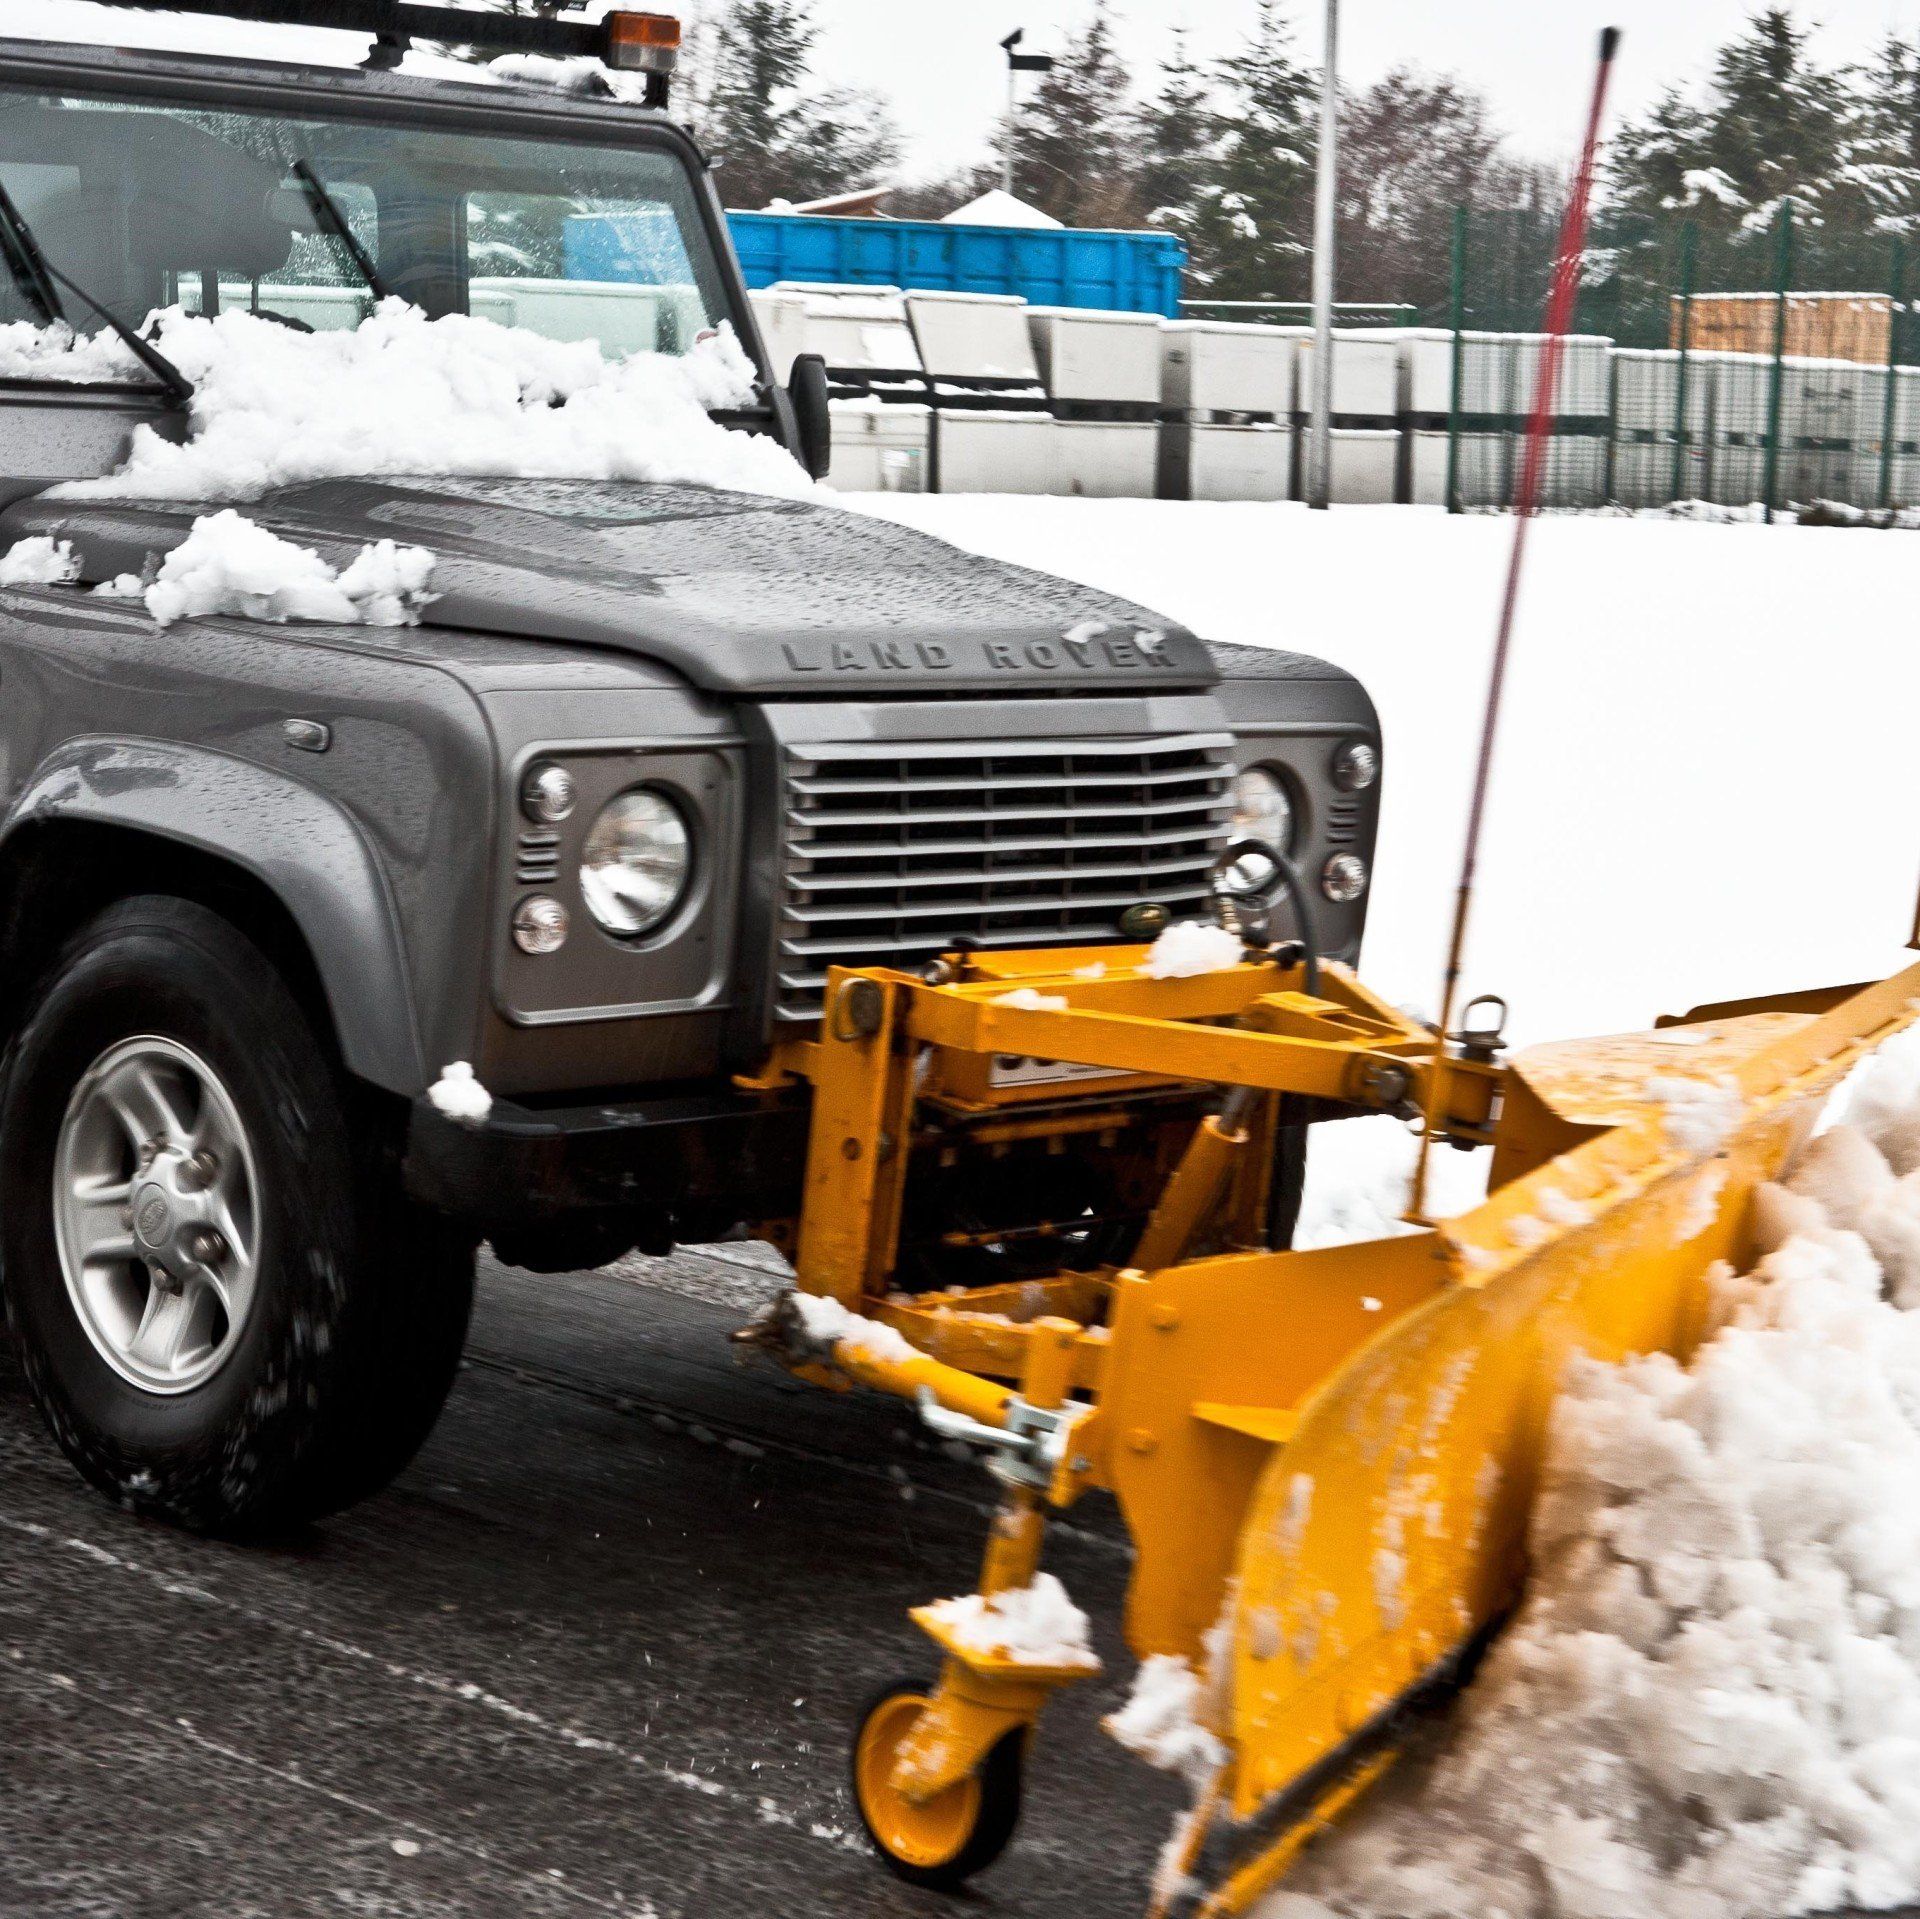 4x4 road gritter